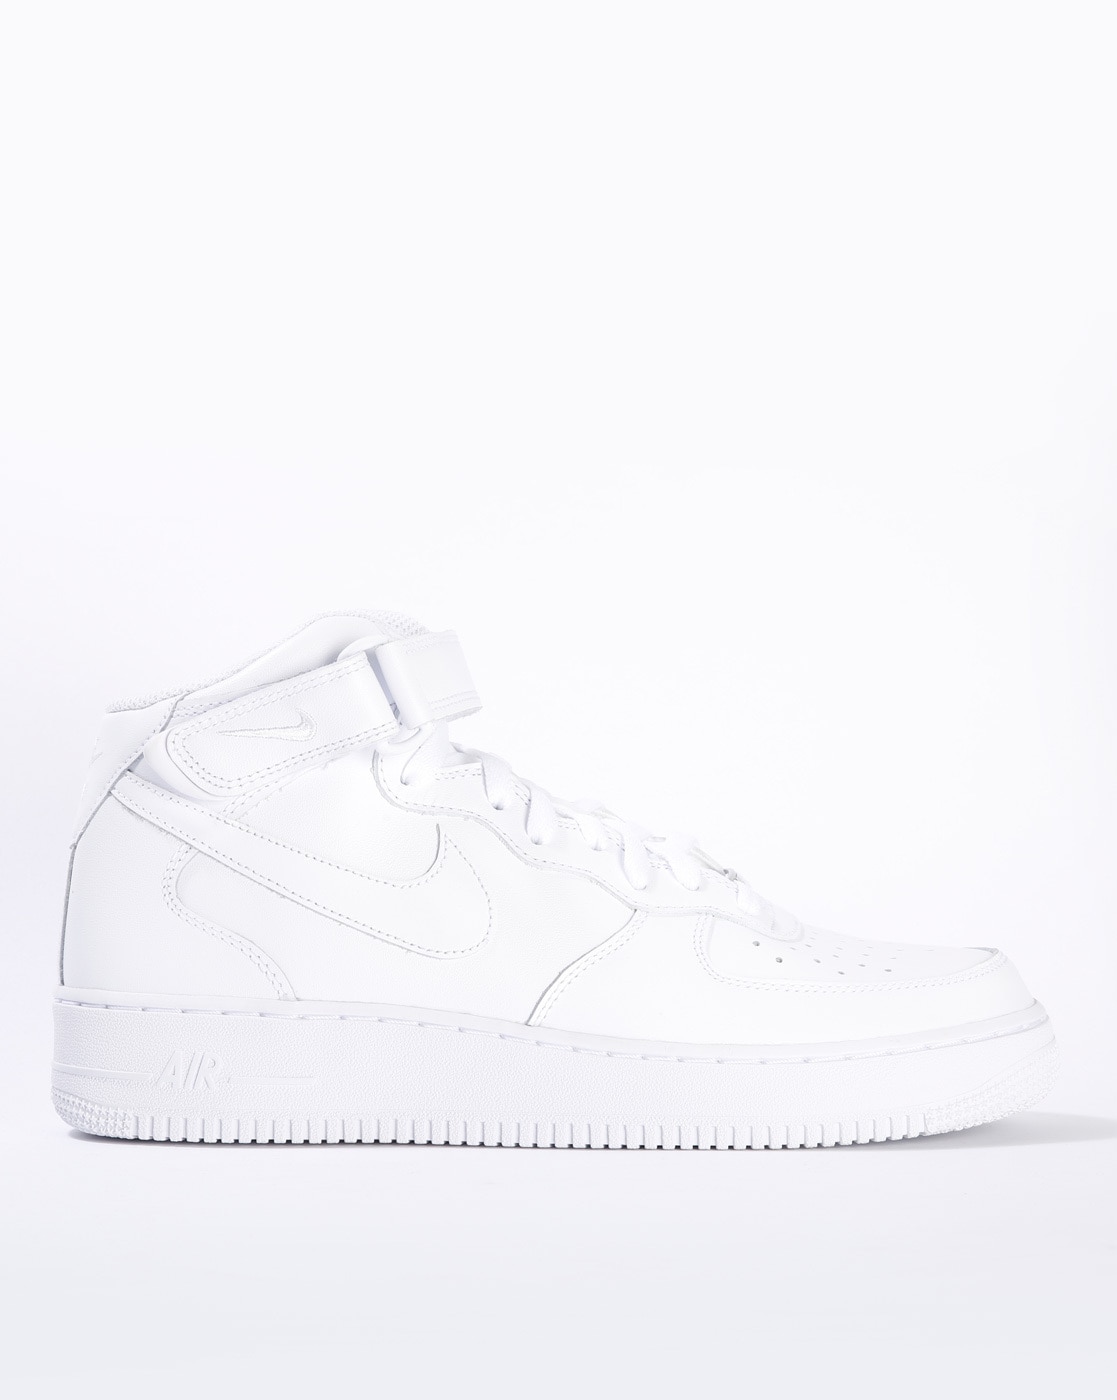 Buy White Sneakers for Men by NIKE Online